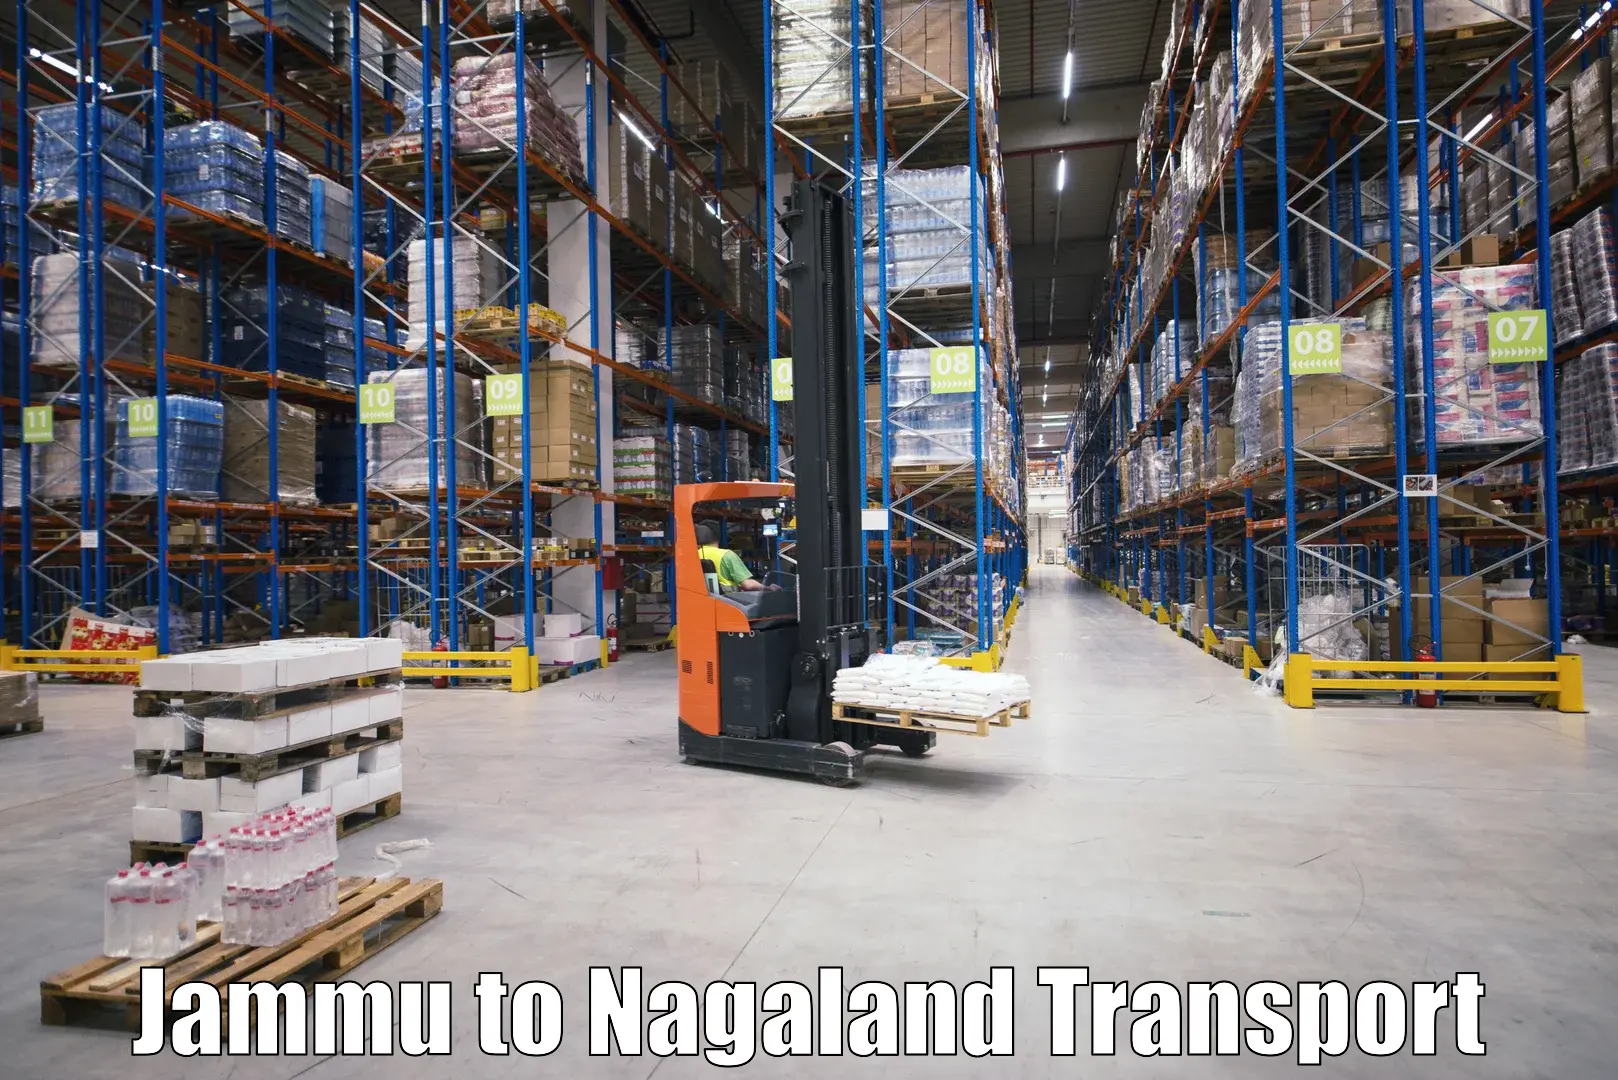 Transport bike from one state to another Jammu to Nagaland